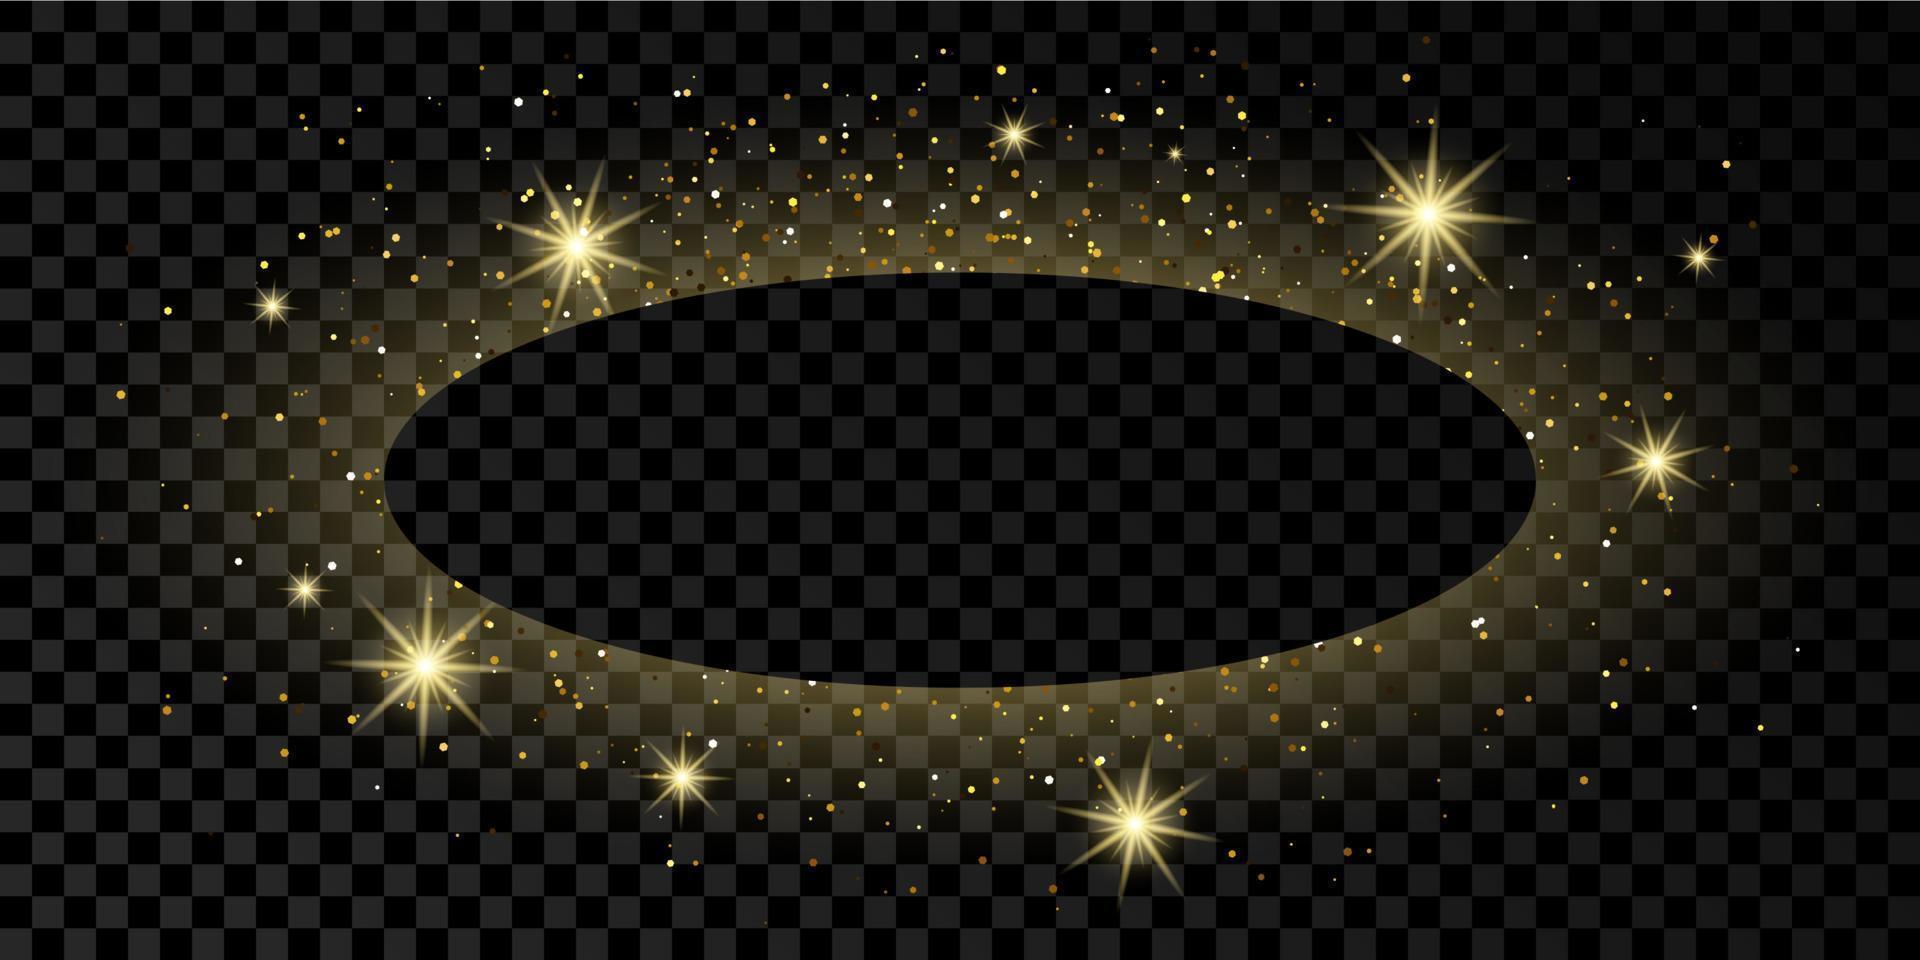 Golden oval frame with glitter, sparkles and flares on dark transparent background. Empty luxury backdrop. Vector illustration.